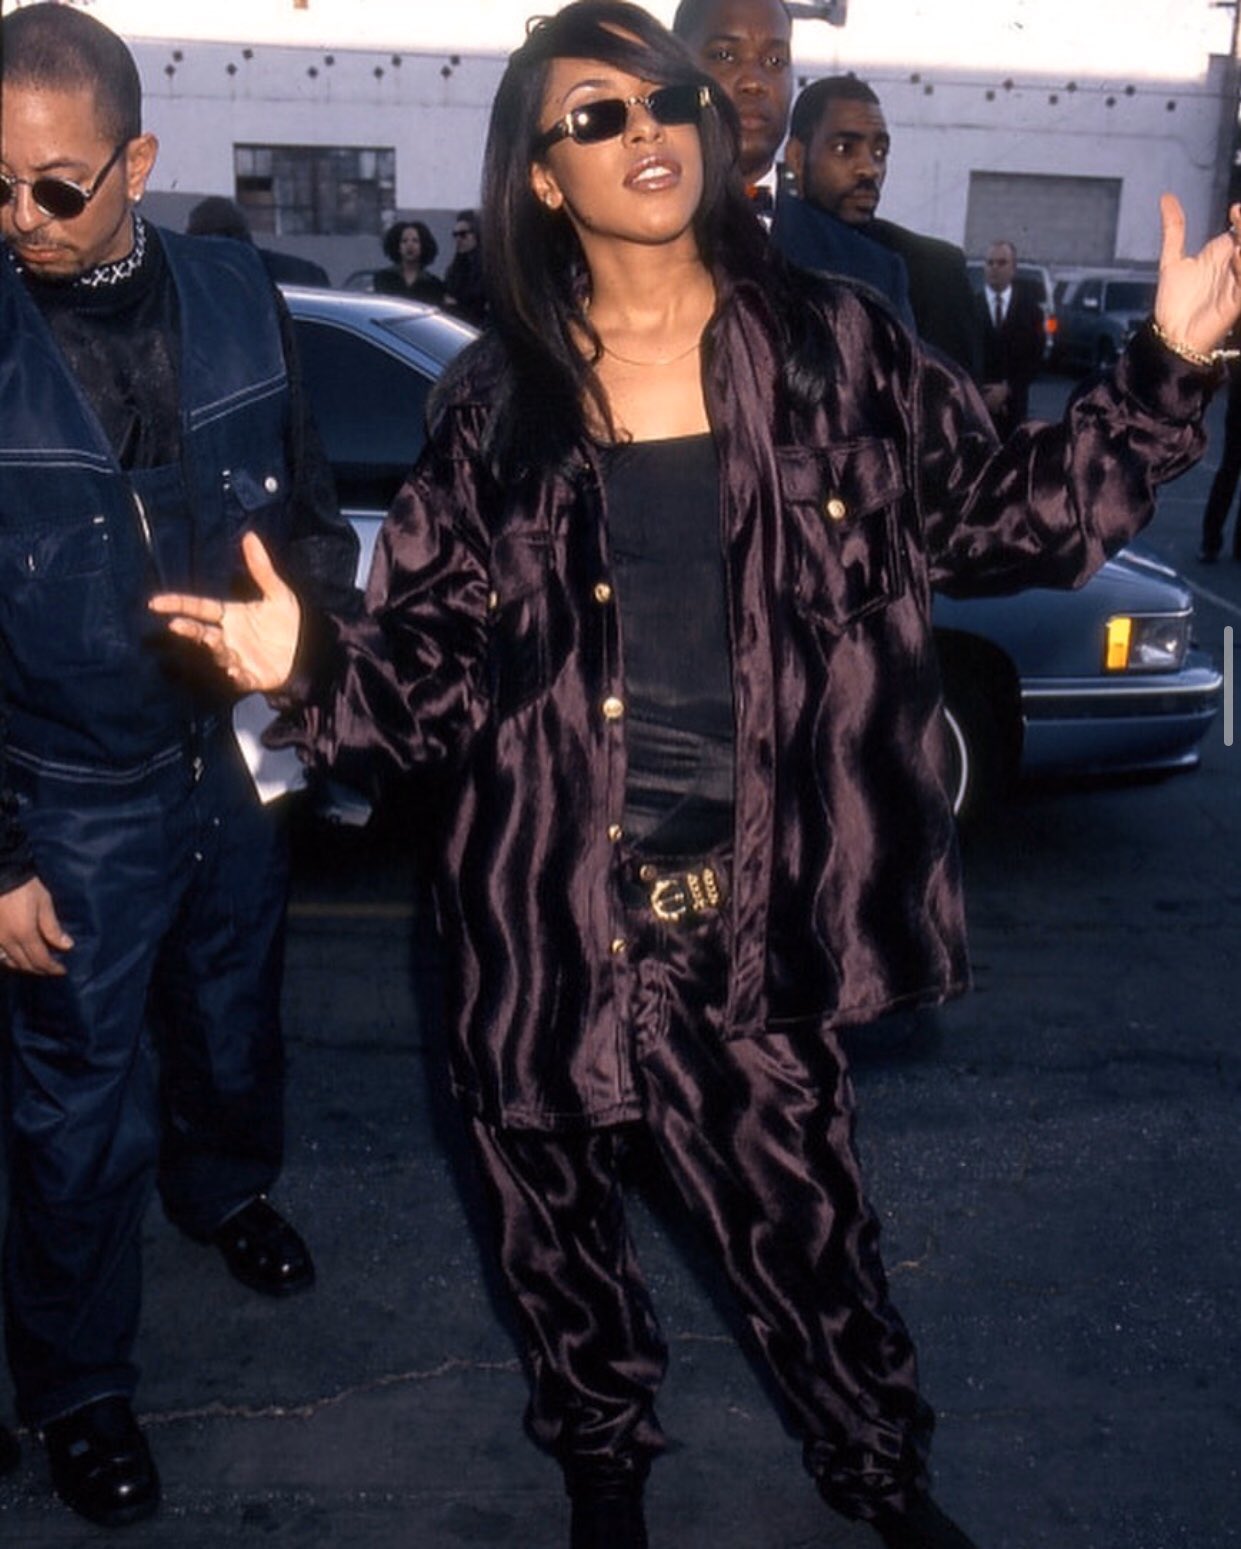 23 Unforgettable Aaliyah Outfits - The Iconic Princess Of R&B